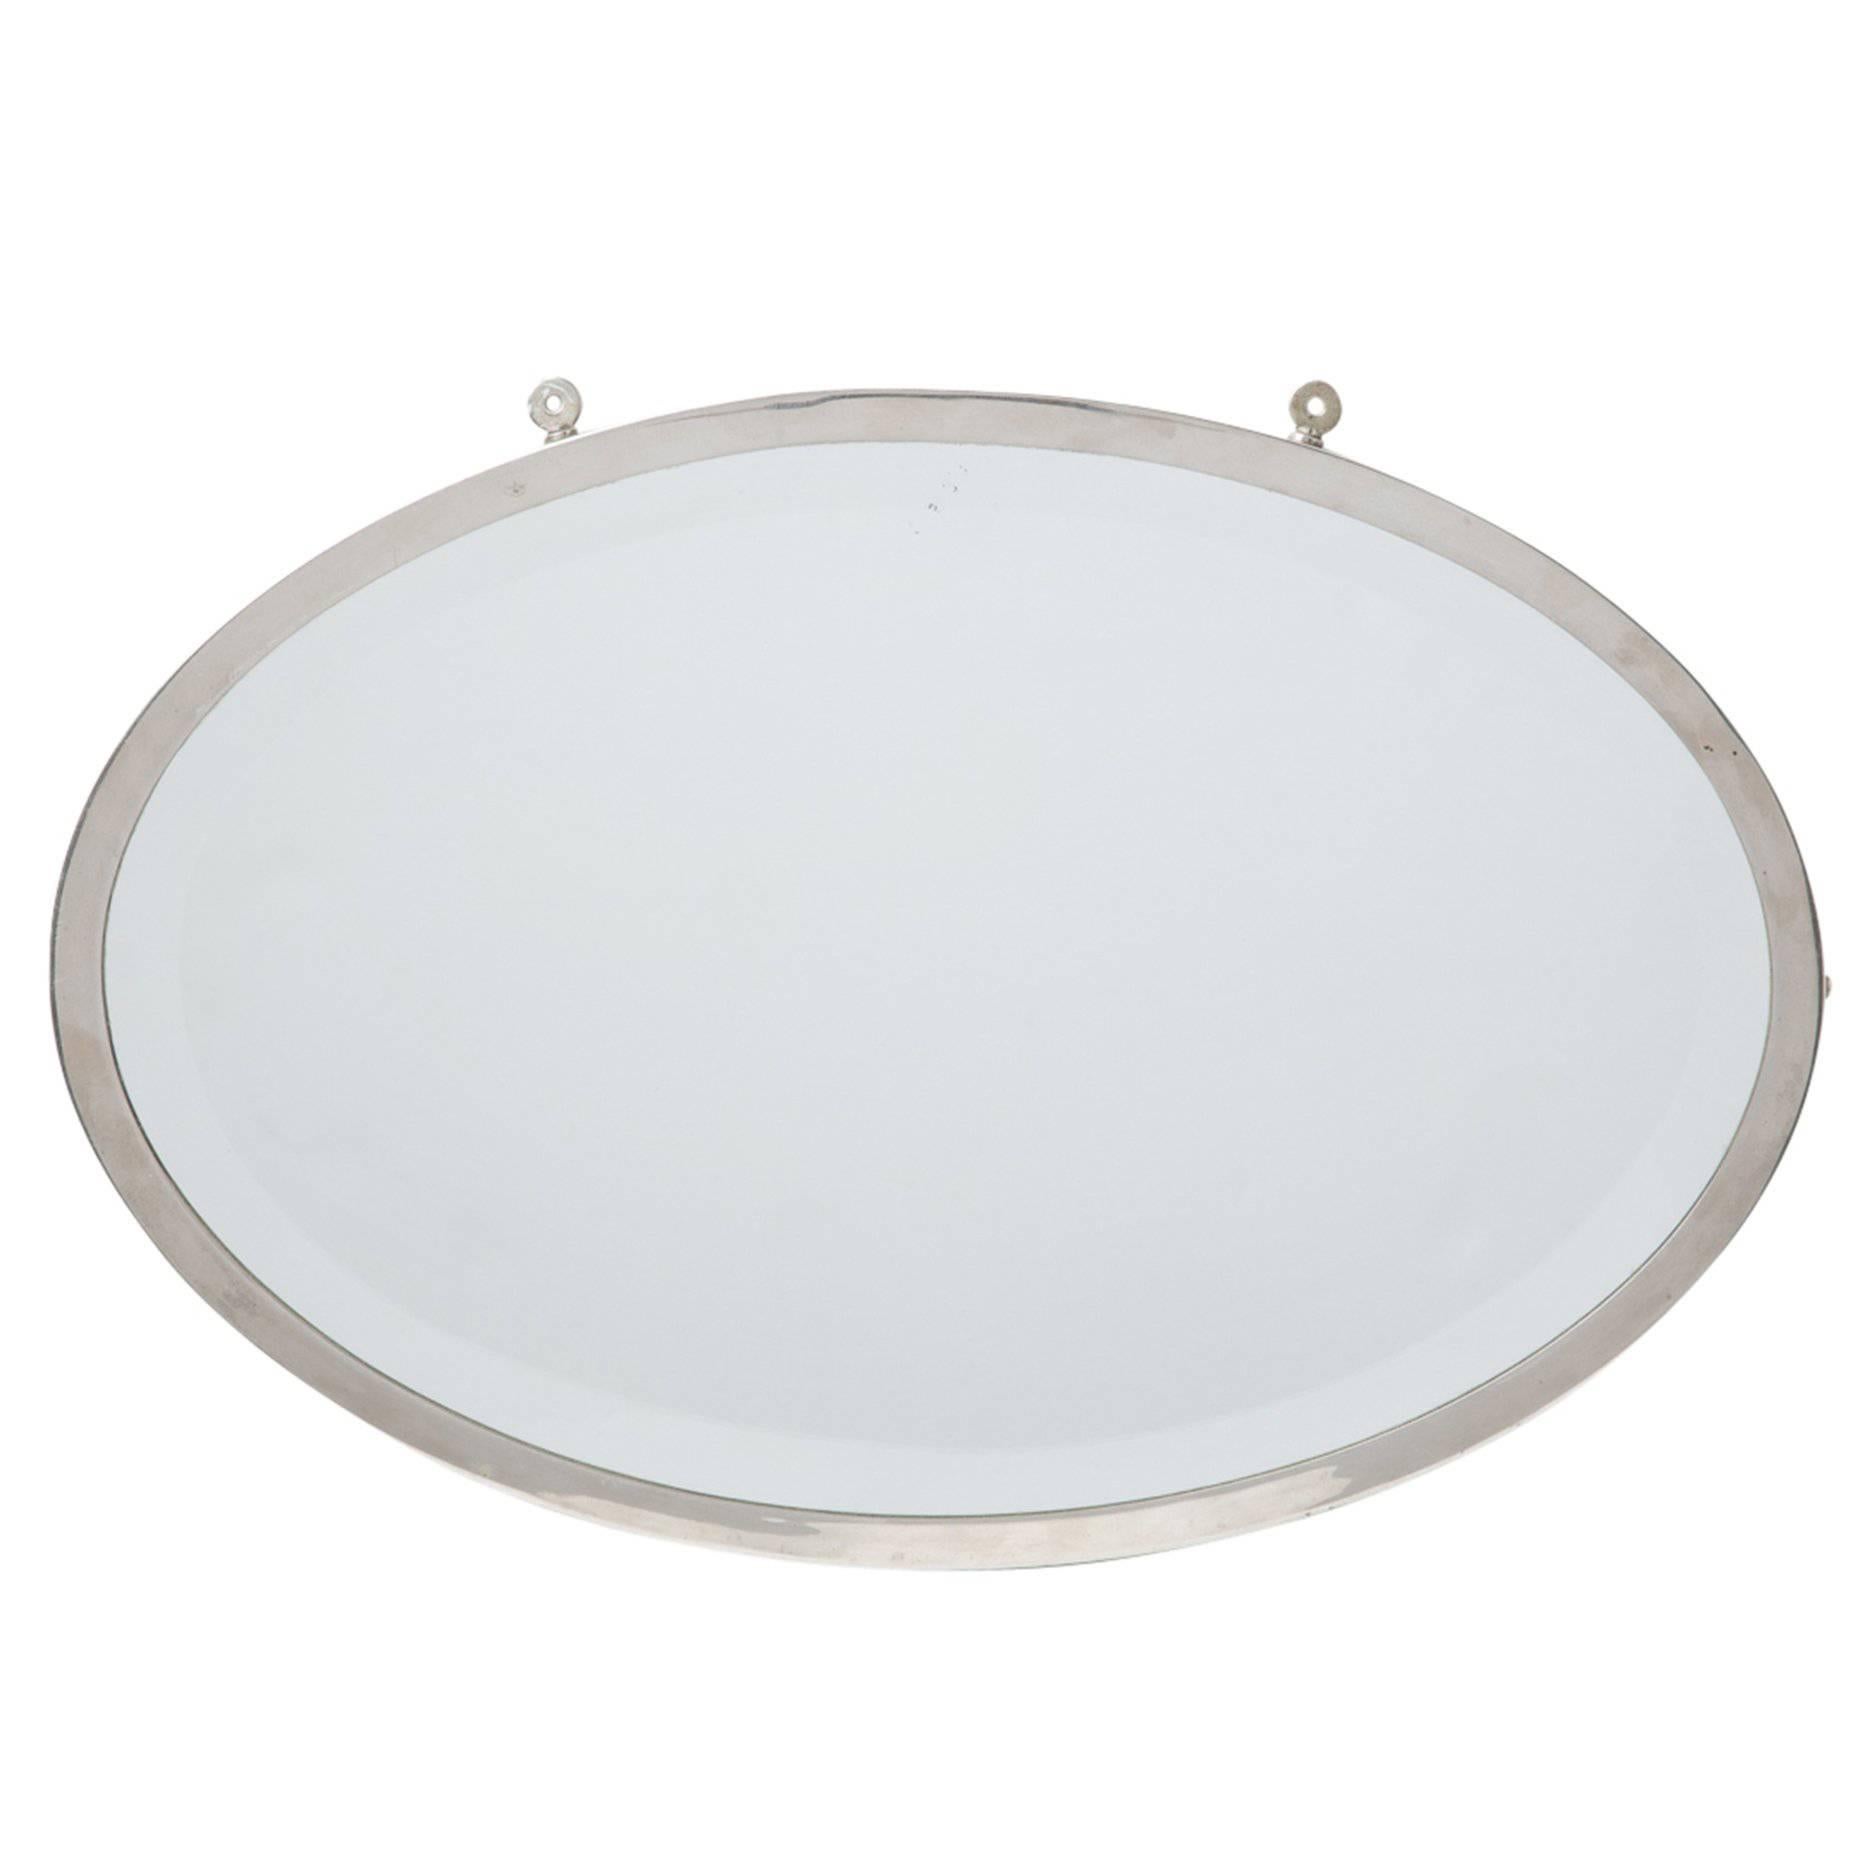 Nickel-Plated Oval Mirror with Beveled Edge, circa 1910s